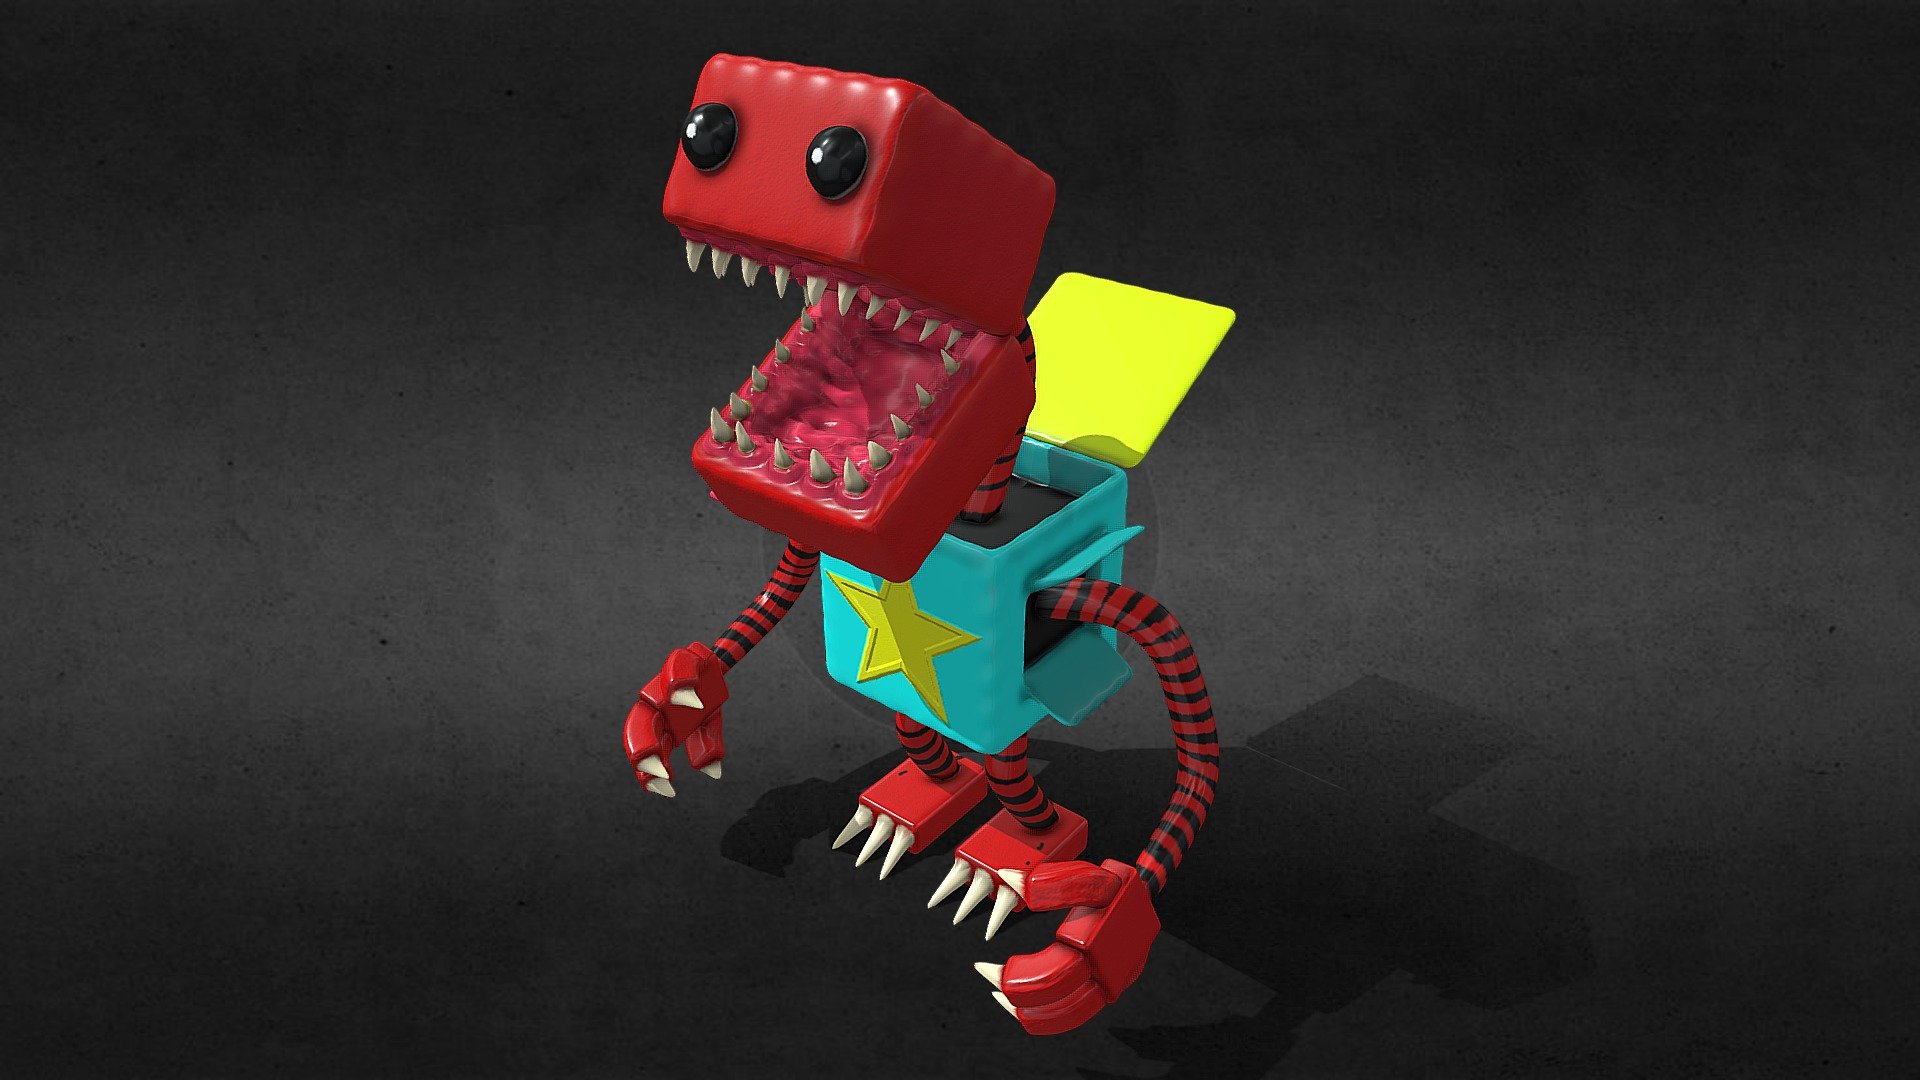 Boxy Boo [JEWELY ROBOT SKIN] - 3D model by ArachnoBoy (@vang807